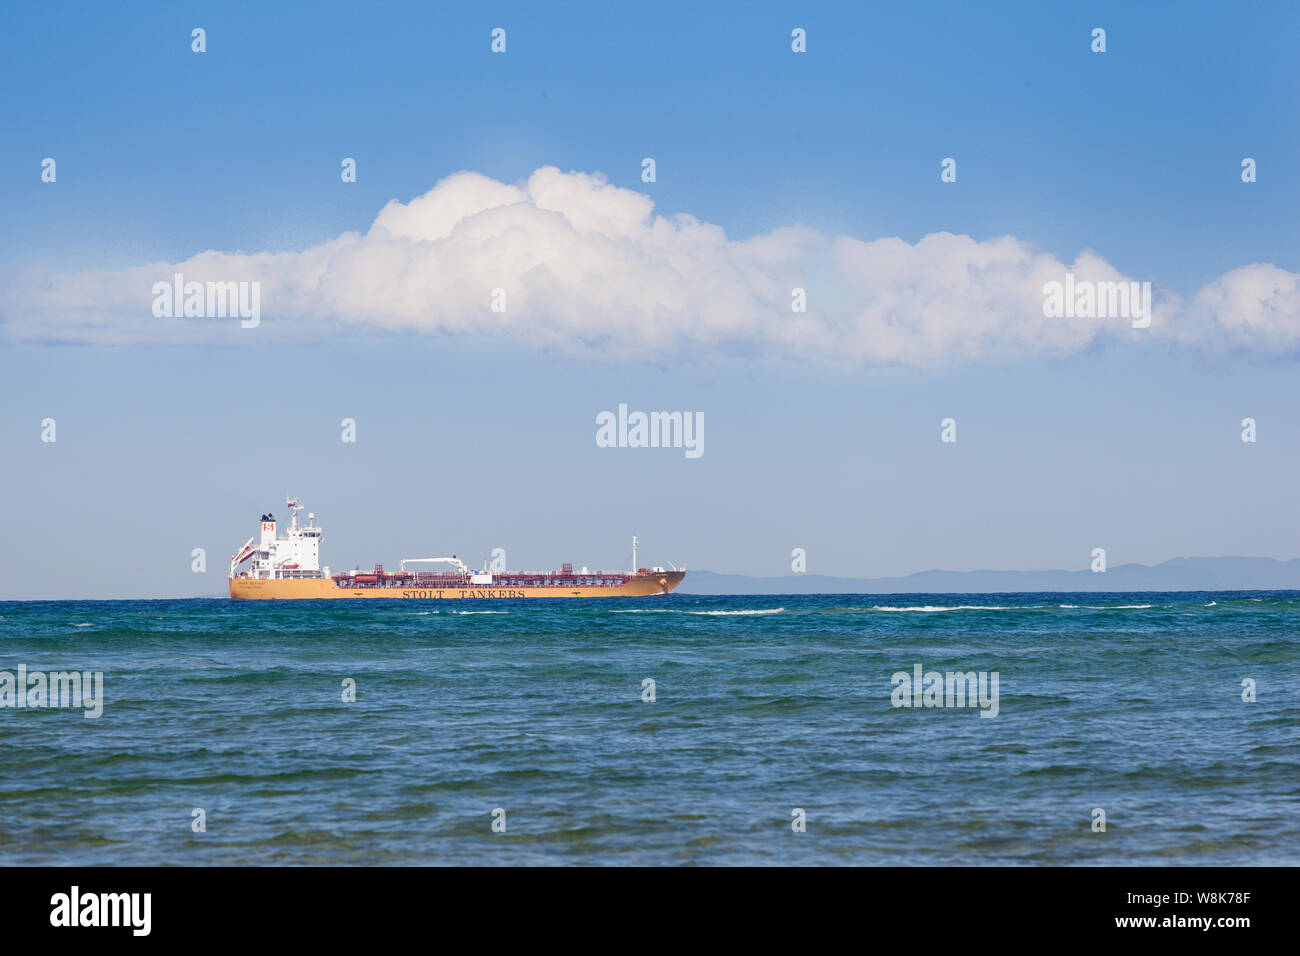 A huge yellow bulk tanker transporting goods internationally is a contrast to the blue sky and sea. Stock Photo